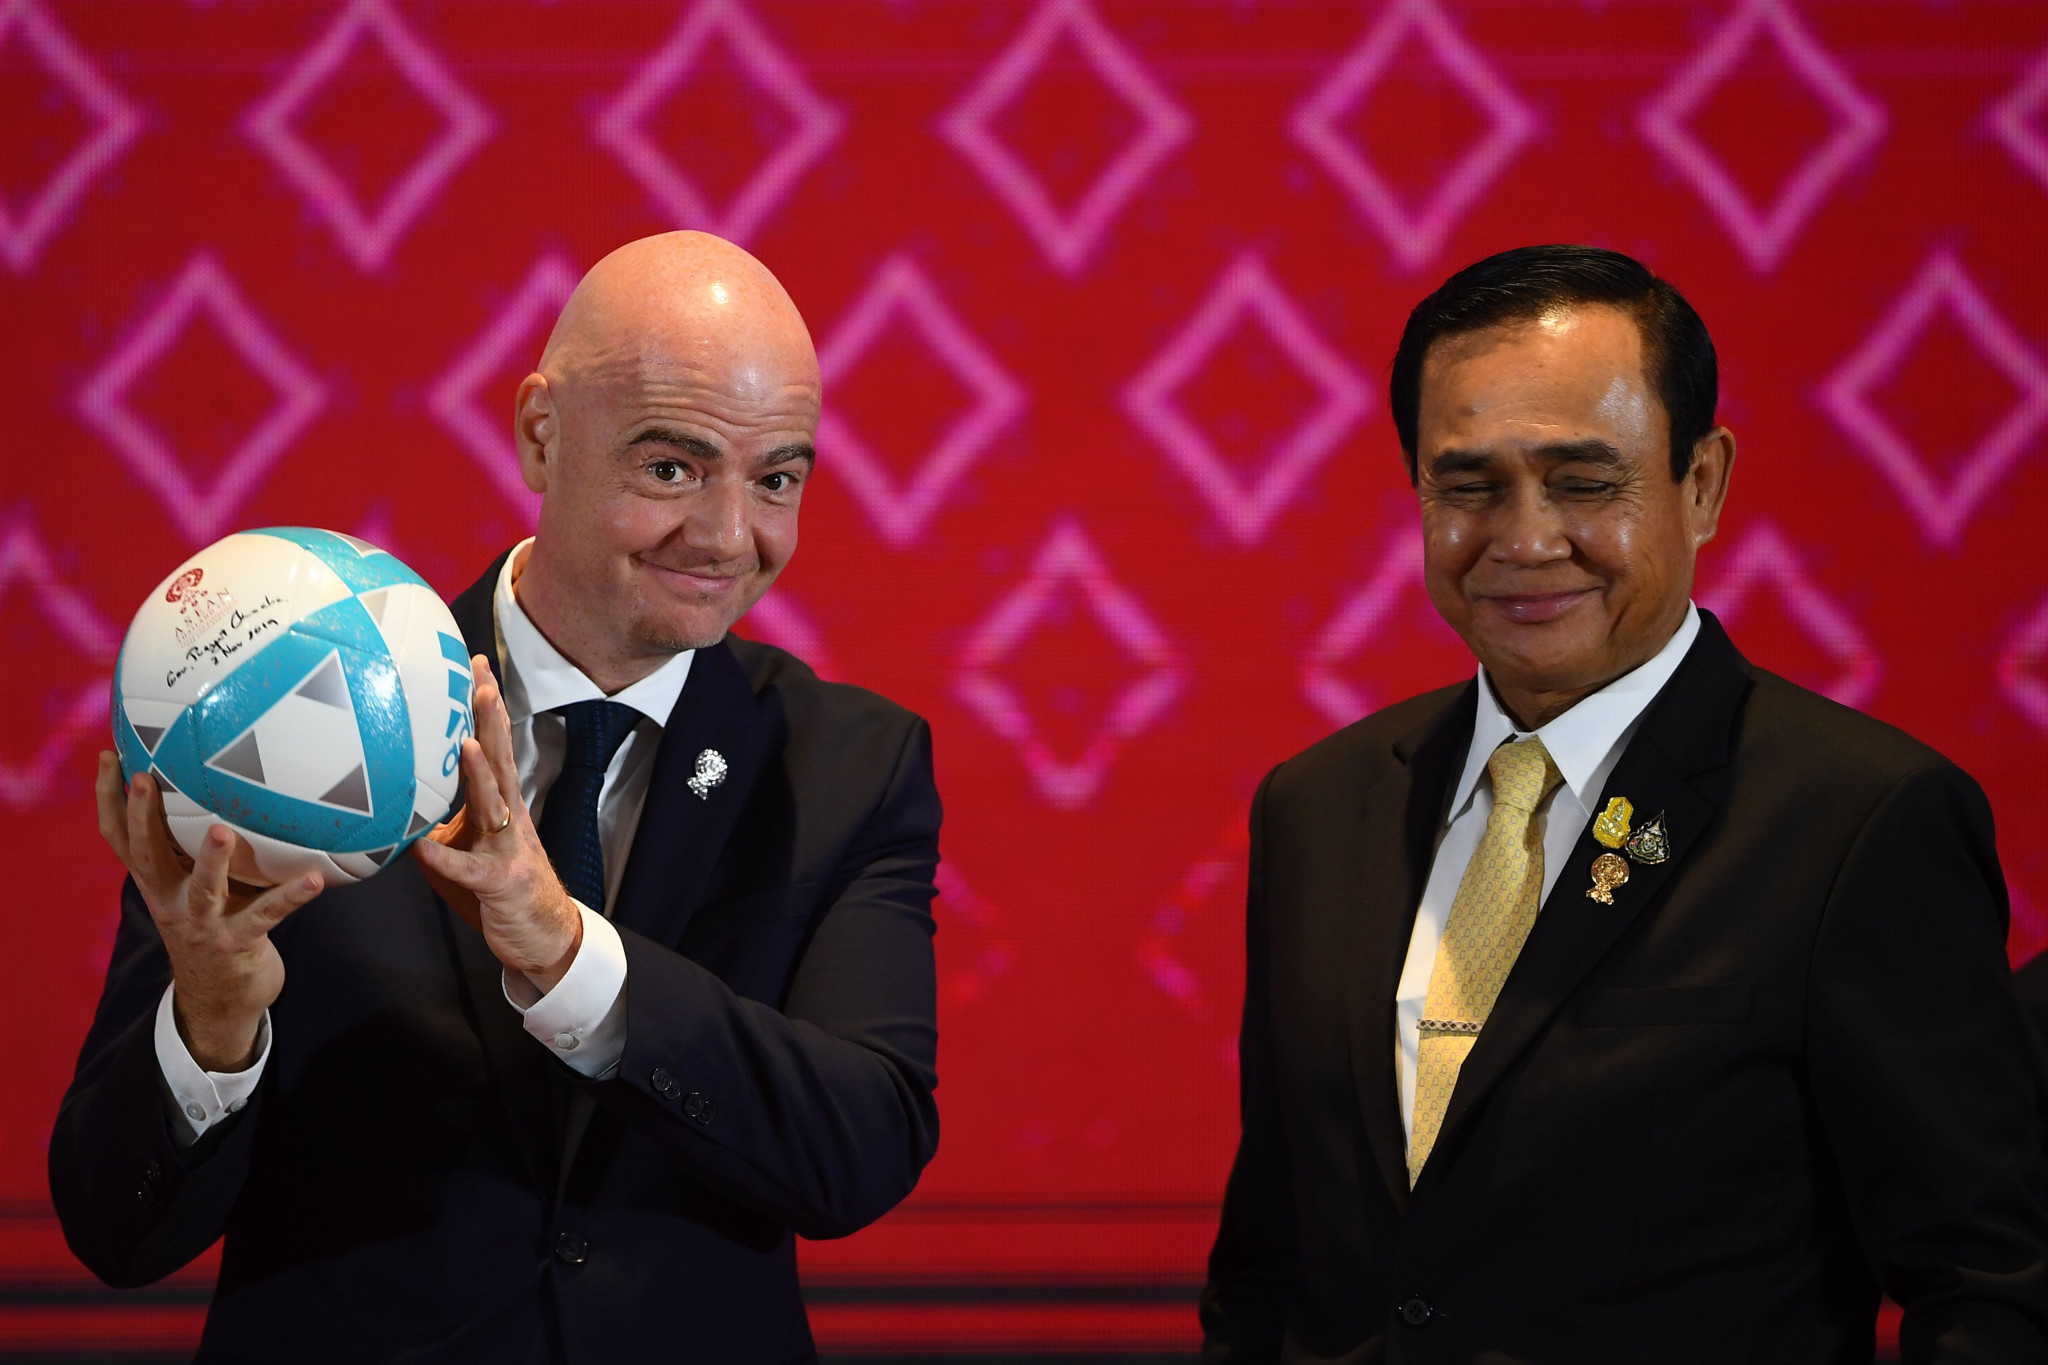 Gianni Infantino holds a football alongside Thailand's Prime Minister Prayut Chan-O-Cha ©Getty Images